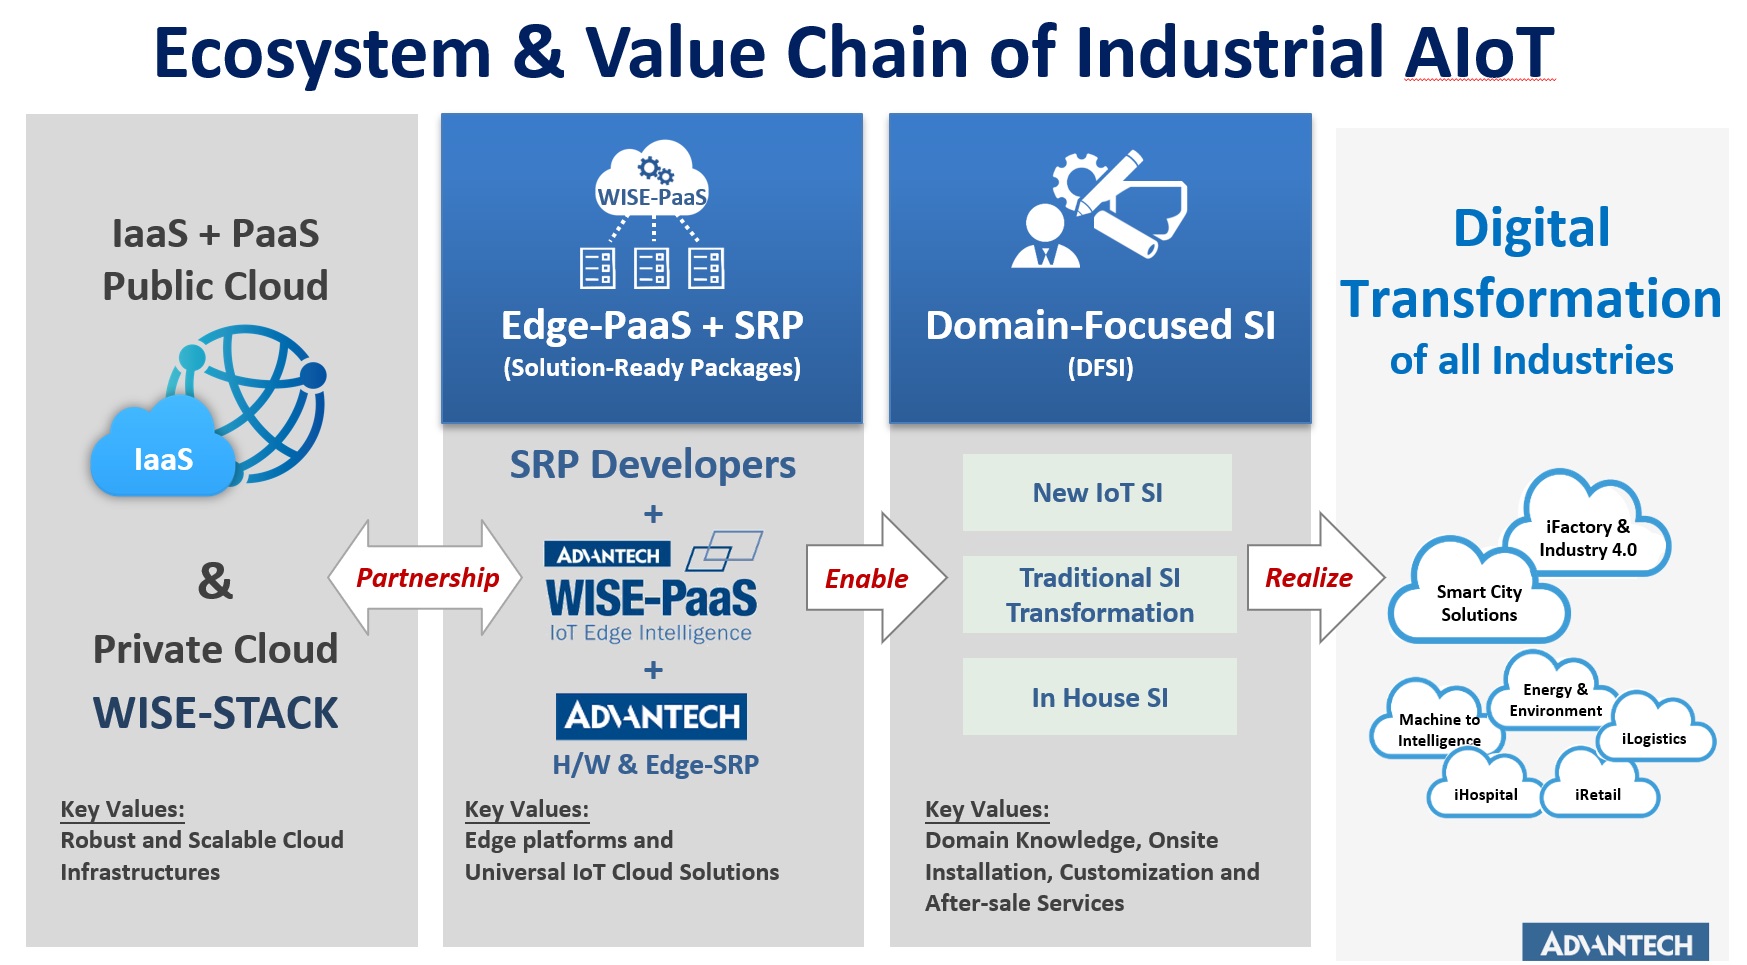 wisepass Ecosystem & Value Chain of Industrial AIoT